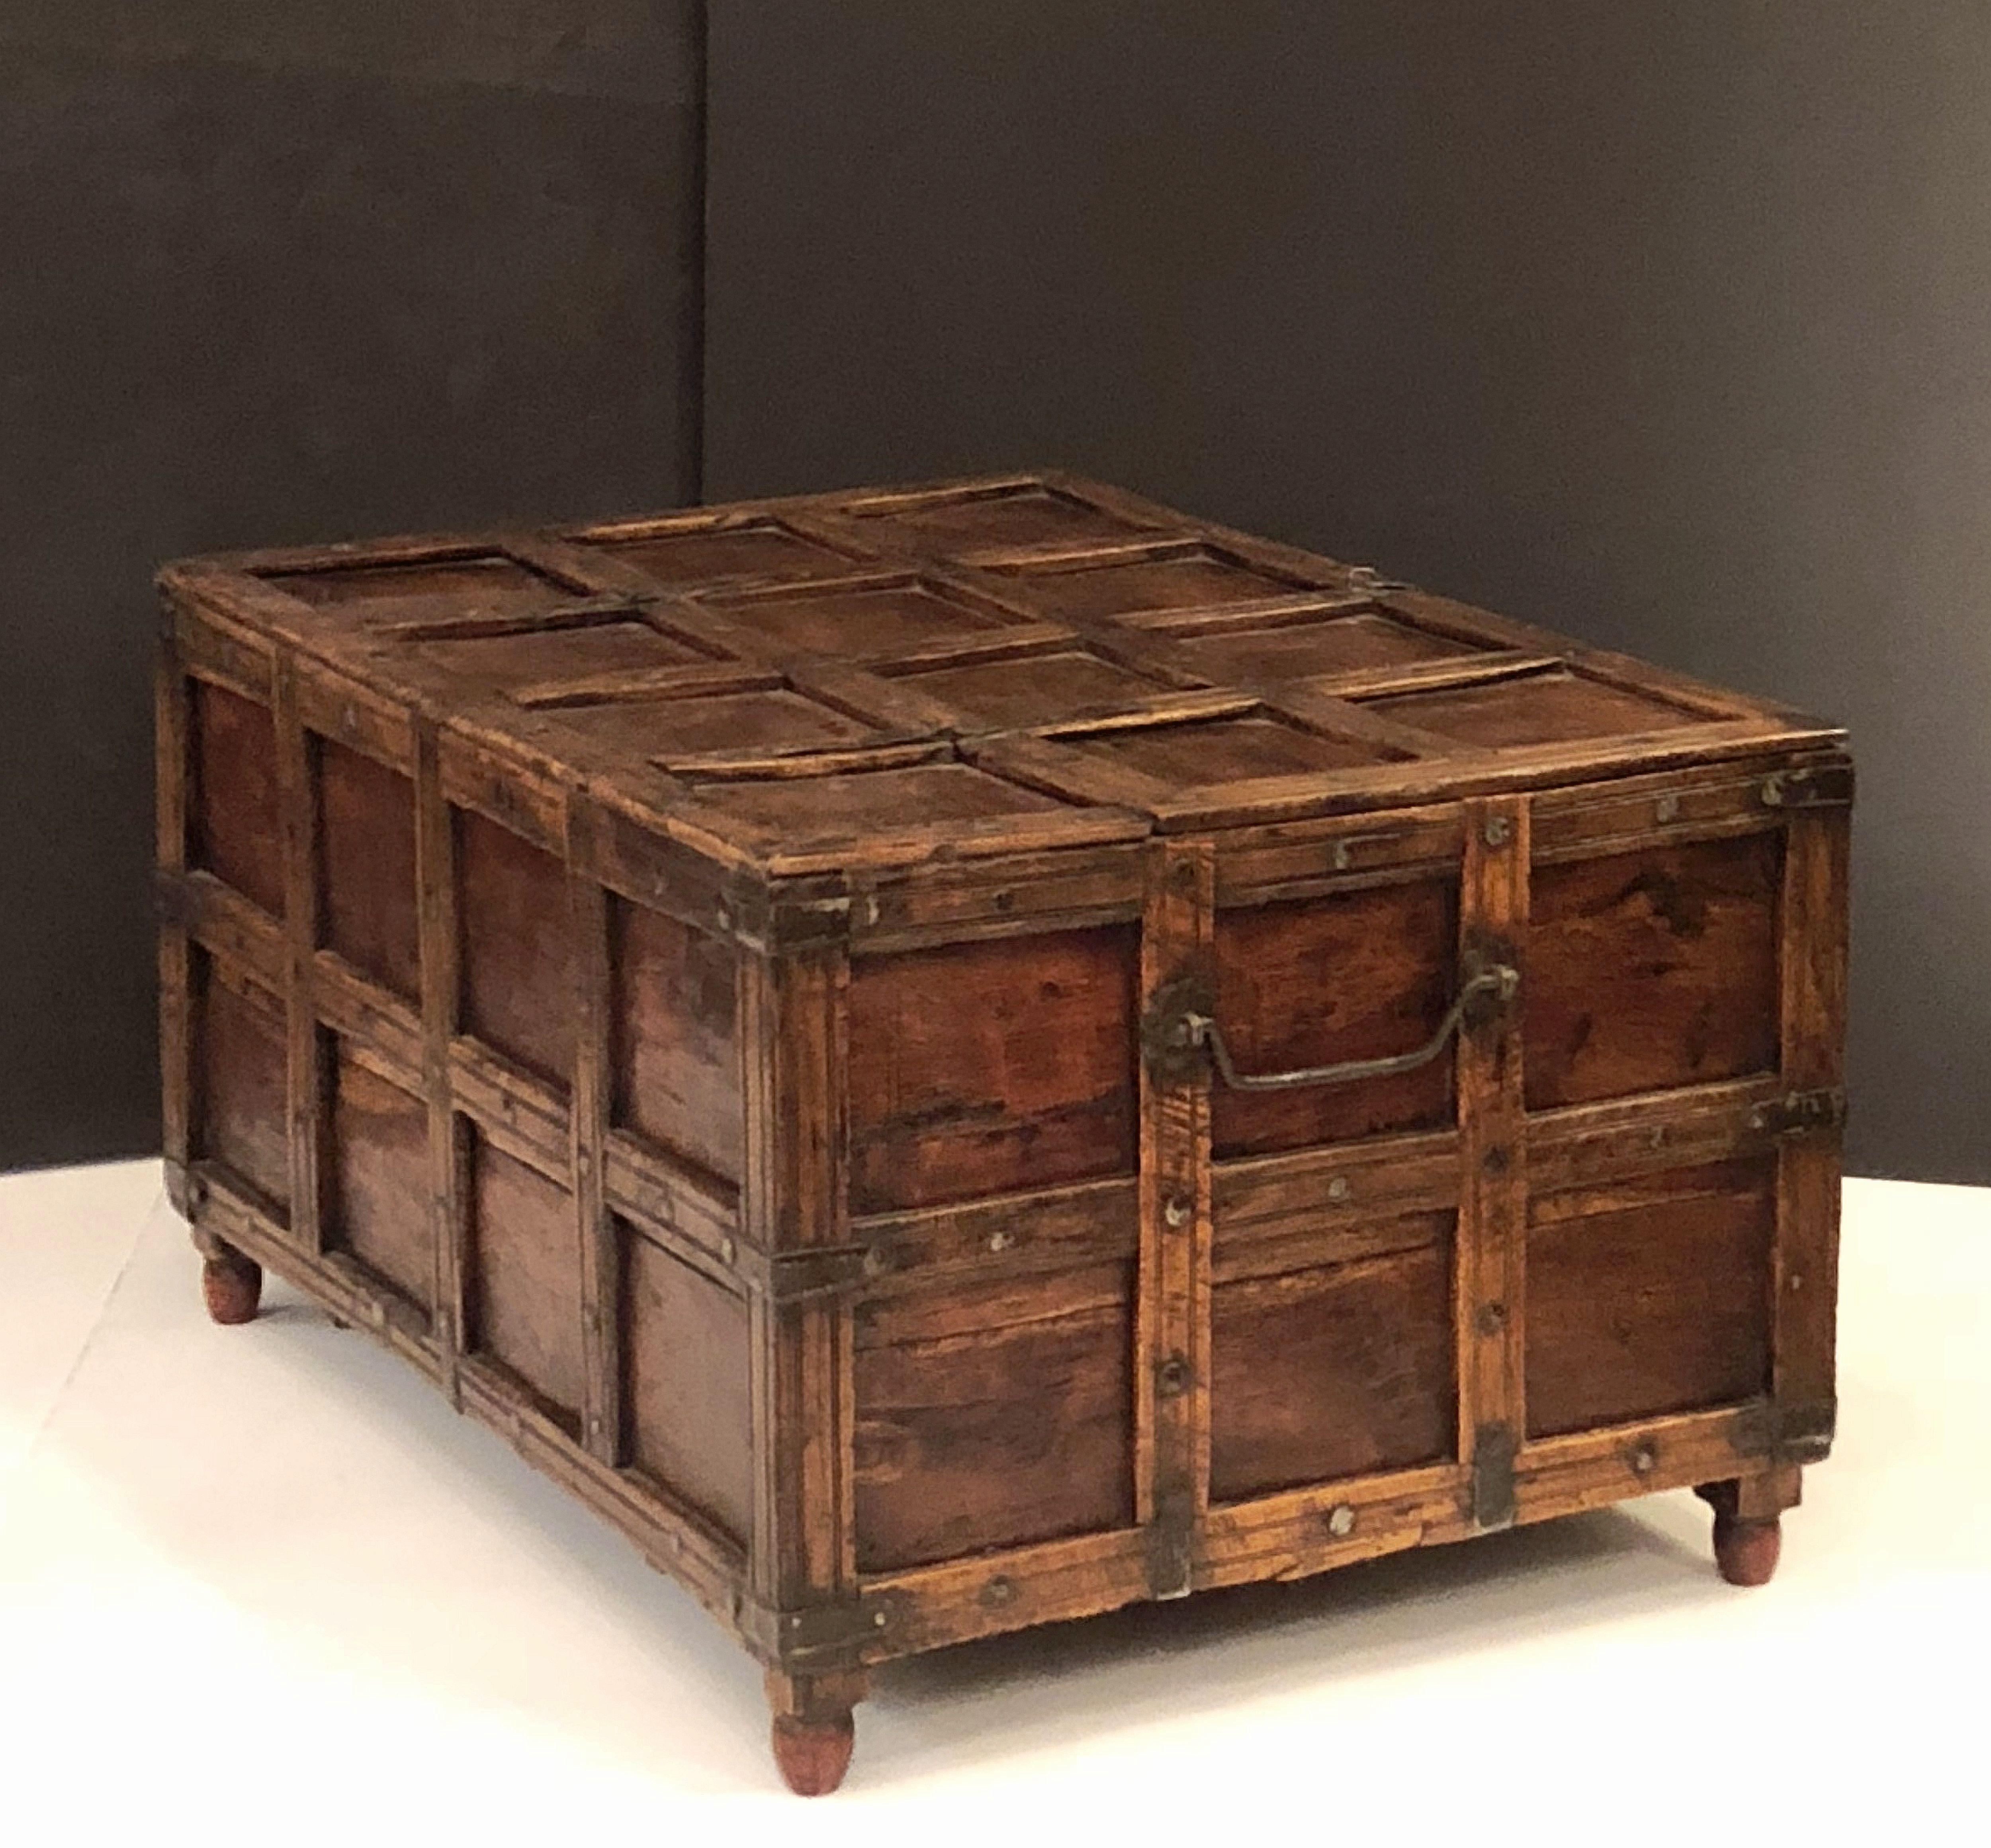 19th Century Iron-Bound Stick Box or Trunk from British Colonial India 'The Raj'